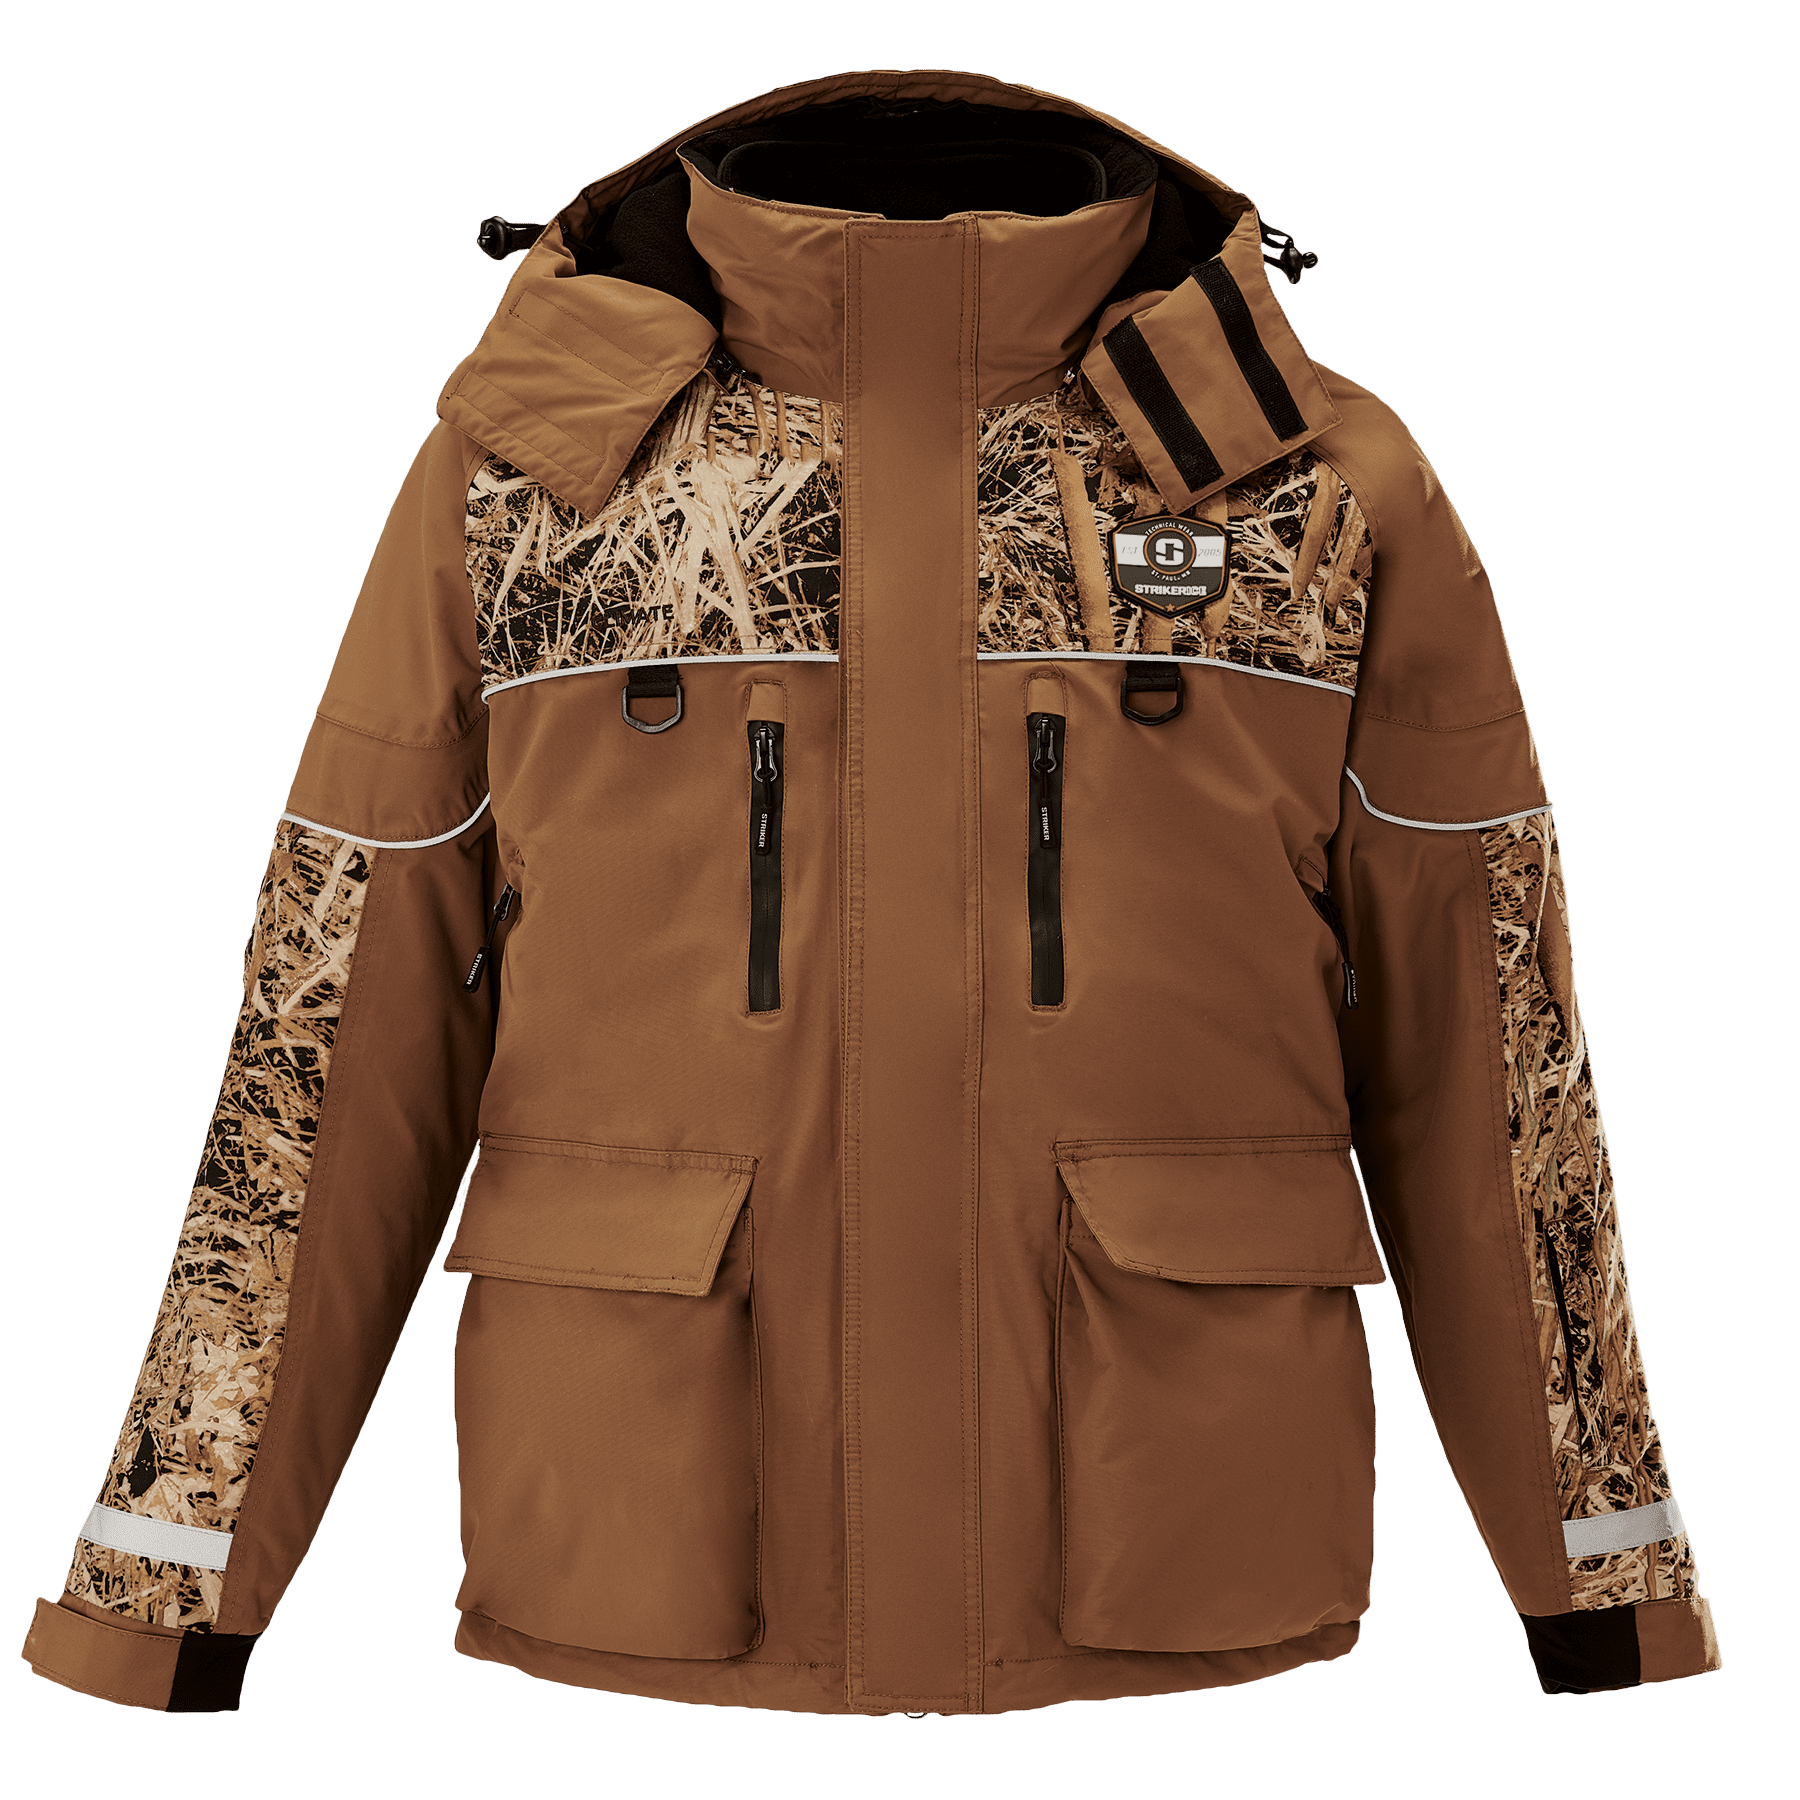 STRIKER ICE SI Climate Jacket, Brown/Camo, S (116092)